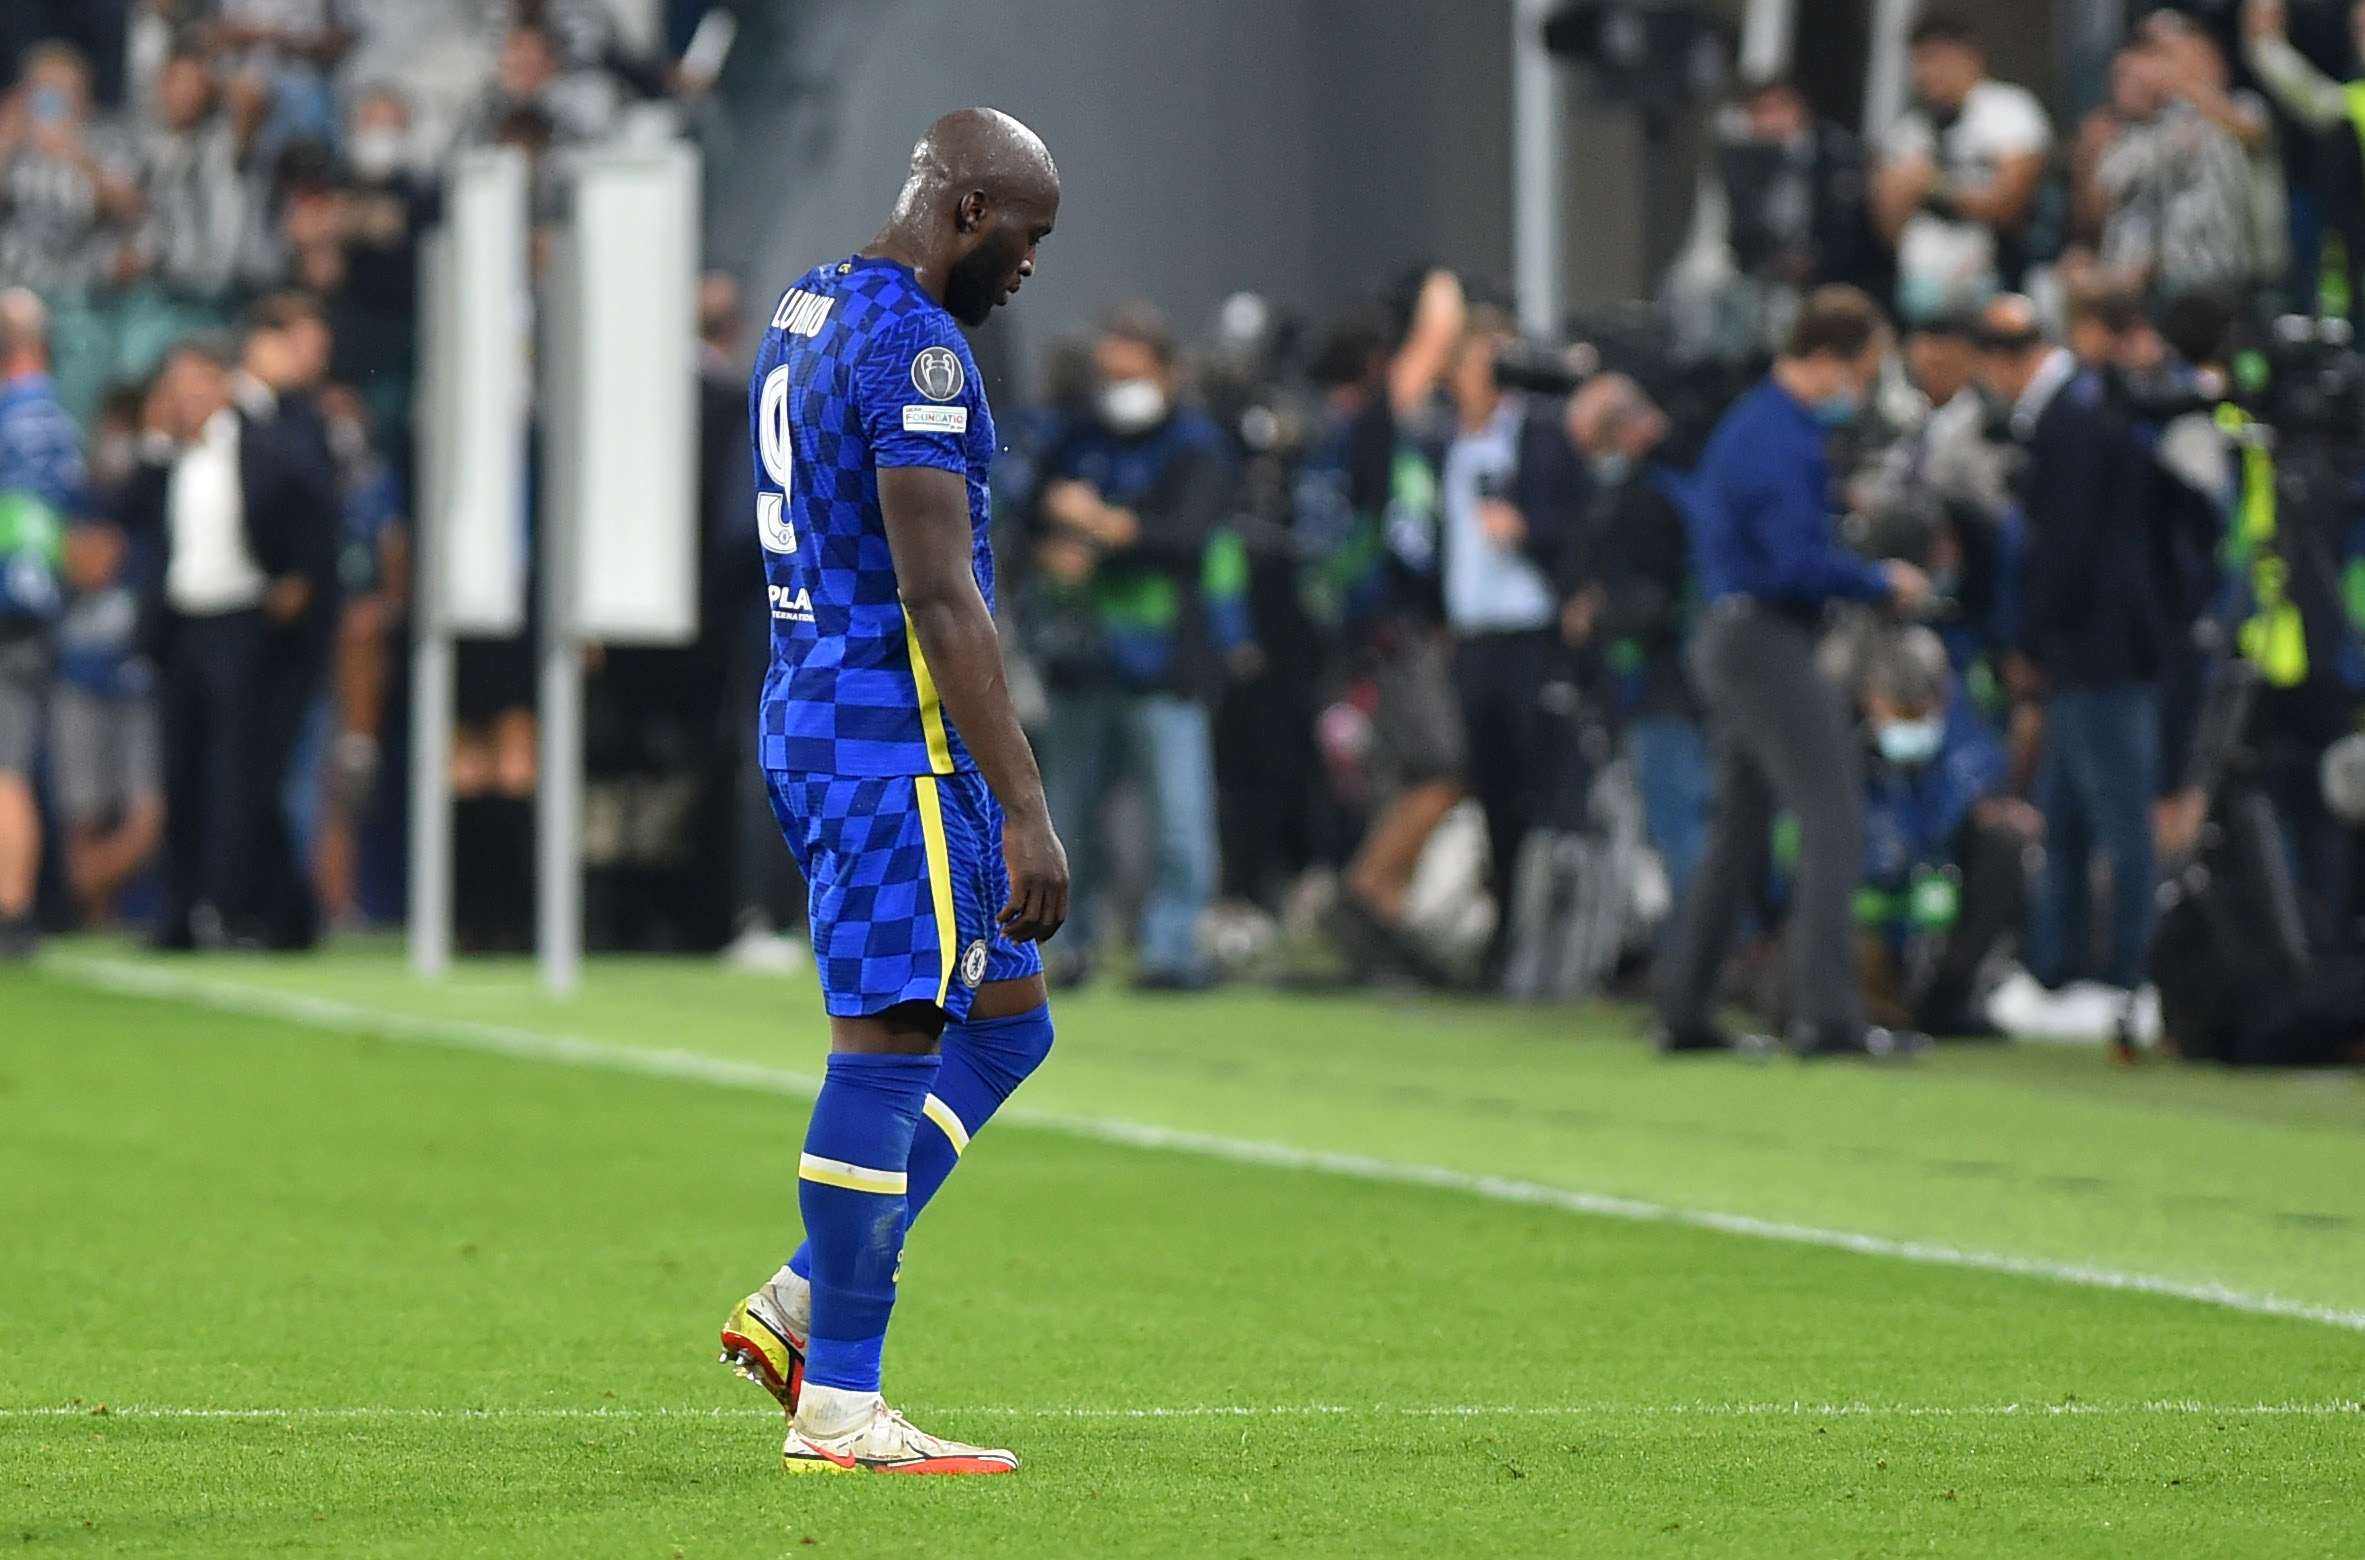 Soccer Football - Champions League - Group H - Juventus v Chelsea - Allianz Stadium, Turin, Italy - September 29, 2021 Chelsea's Romelu Lukaku looks dejected after the match REUTERS/Massimo Pinca